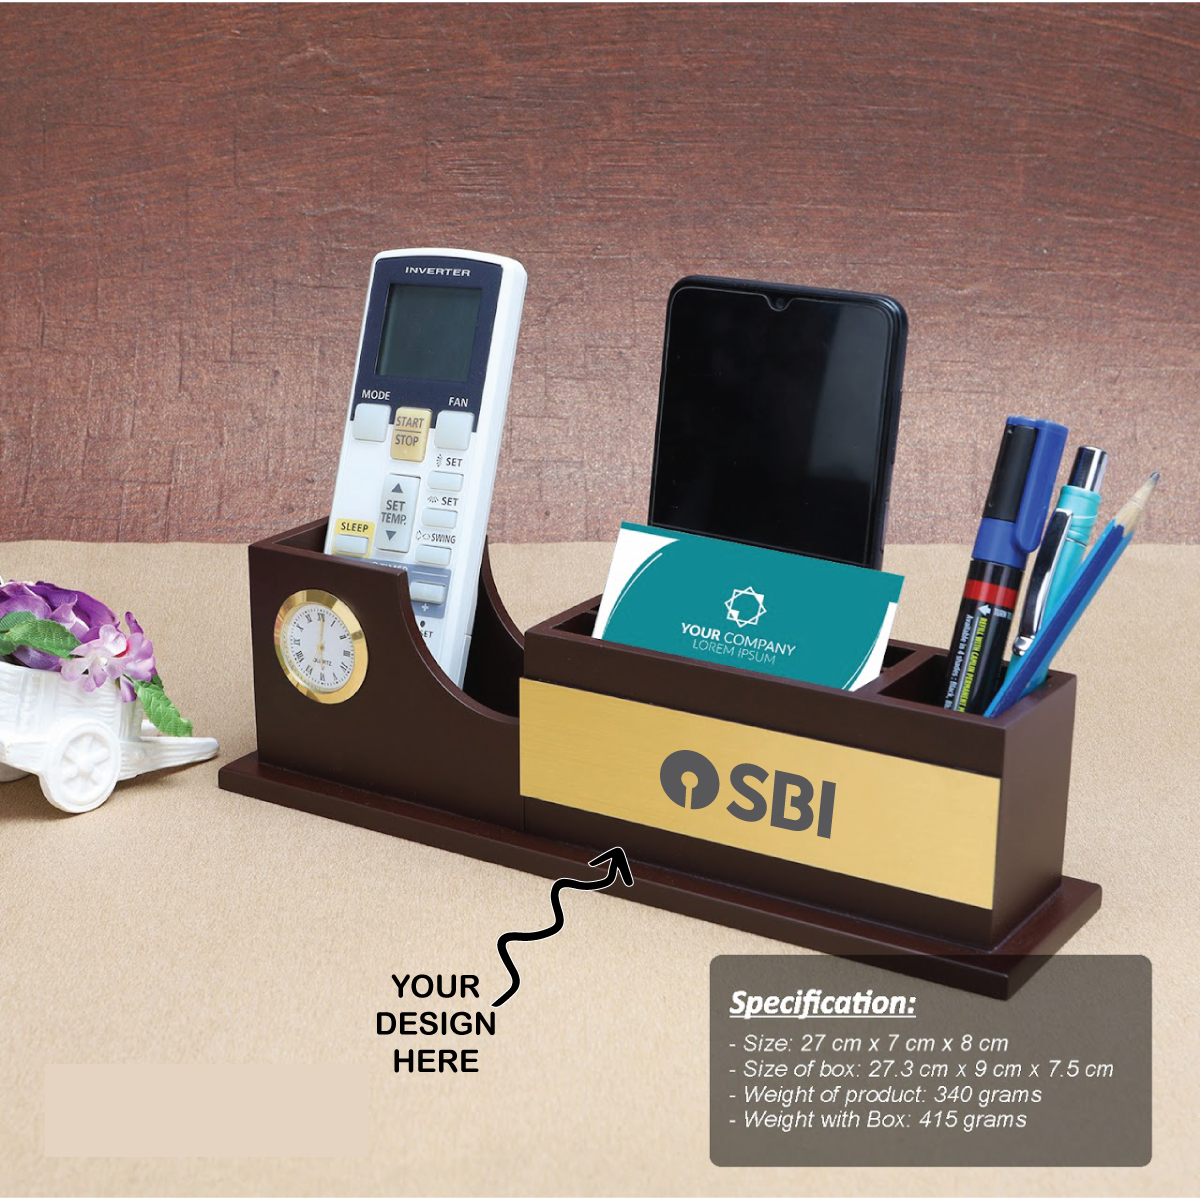 Personalized Engraved Wooden Stationery cum Pen Stand with Clock - For Corporate Gifting, Event or Exhibition Freebies, Promotions, Festival Office Gifting JKWD05